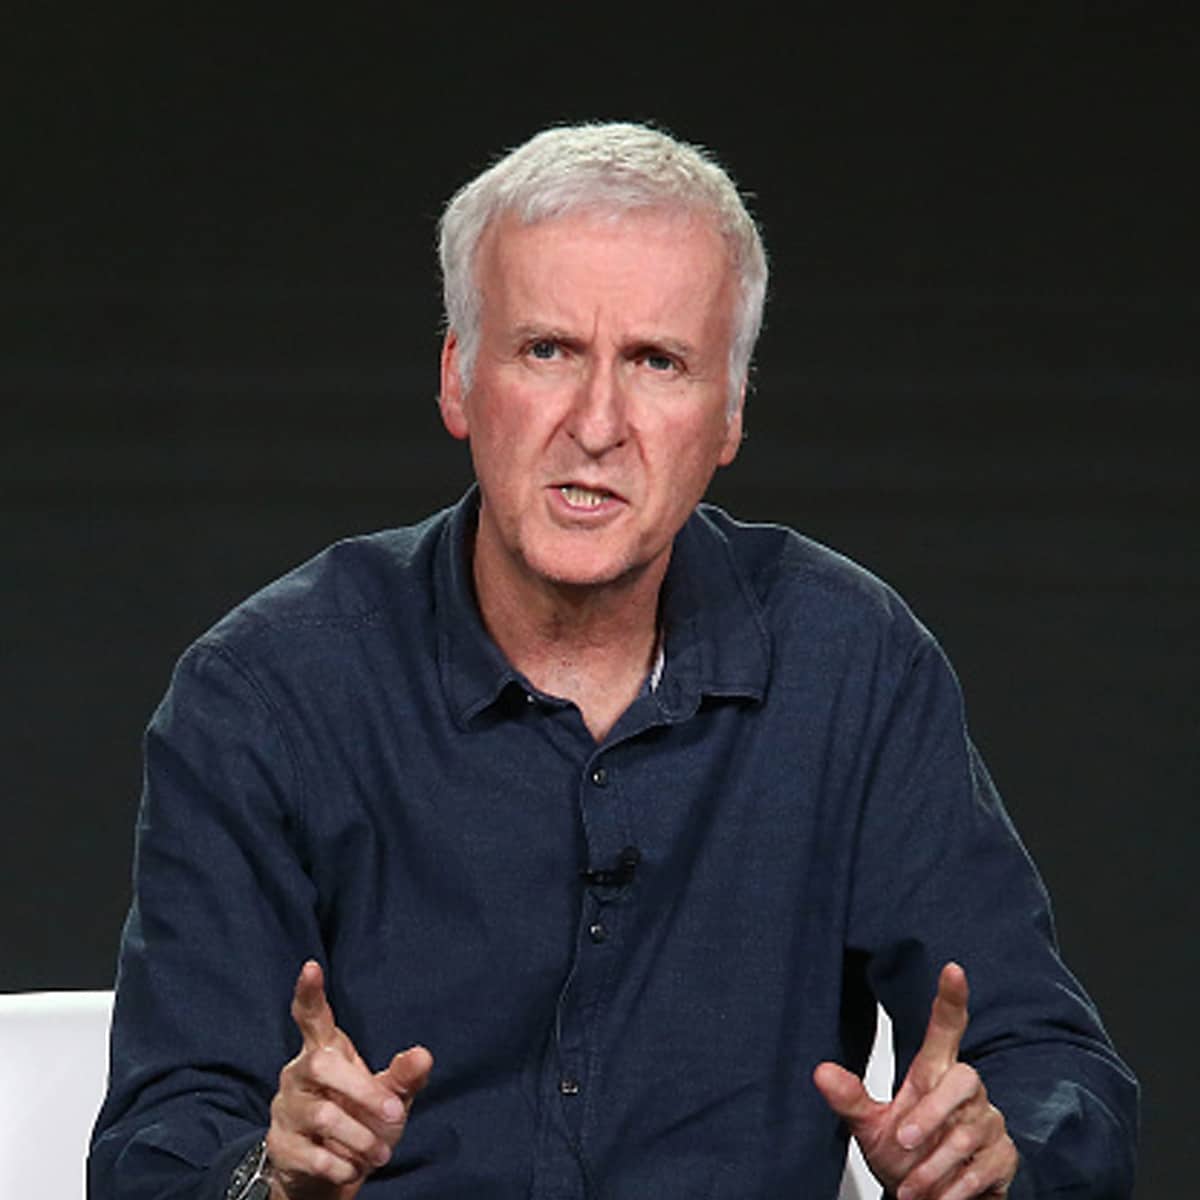 director james cameron speaks during the amc portion of the 2018 winter television association press tour